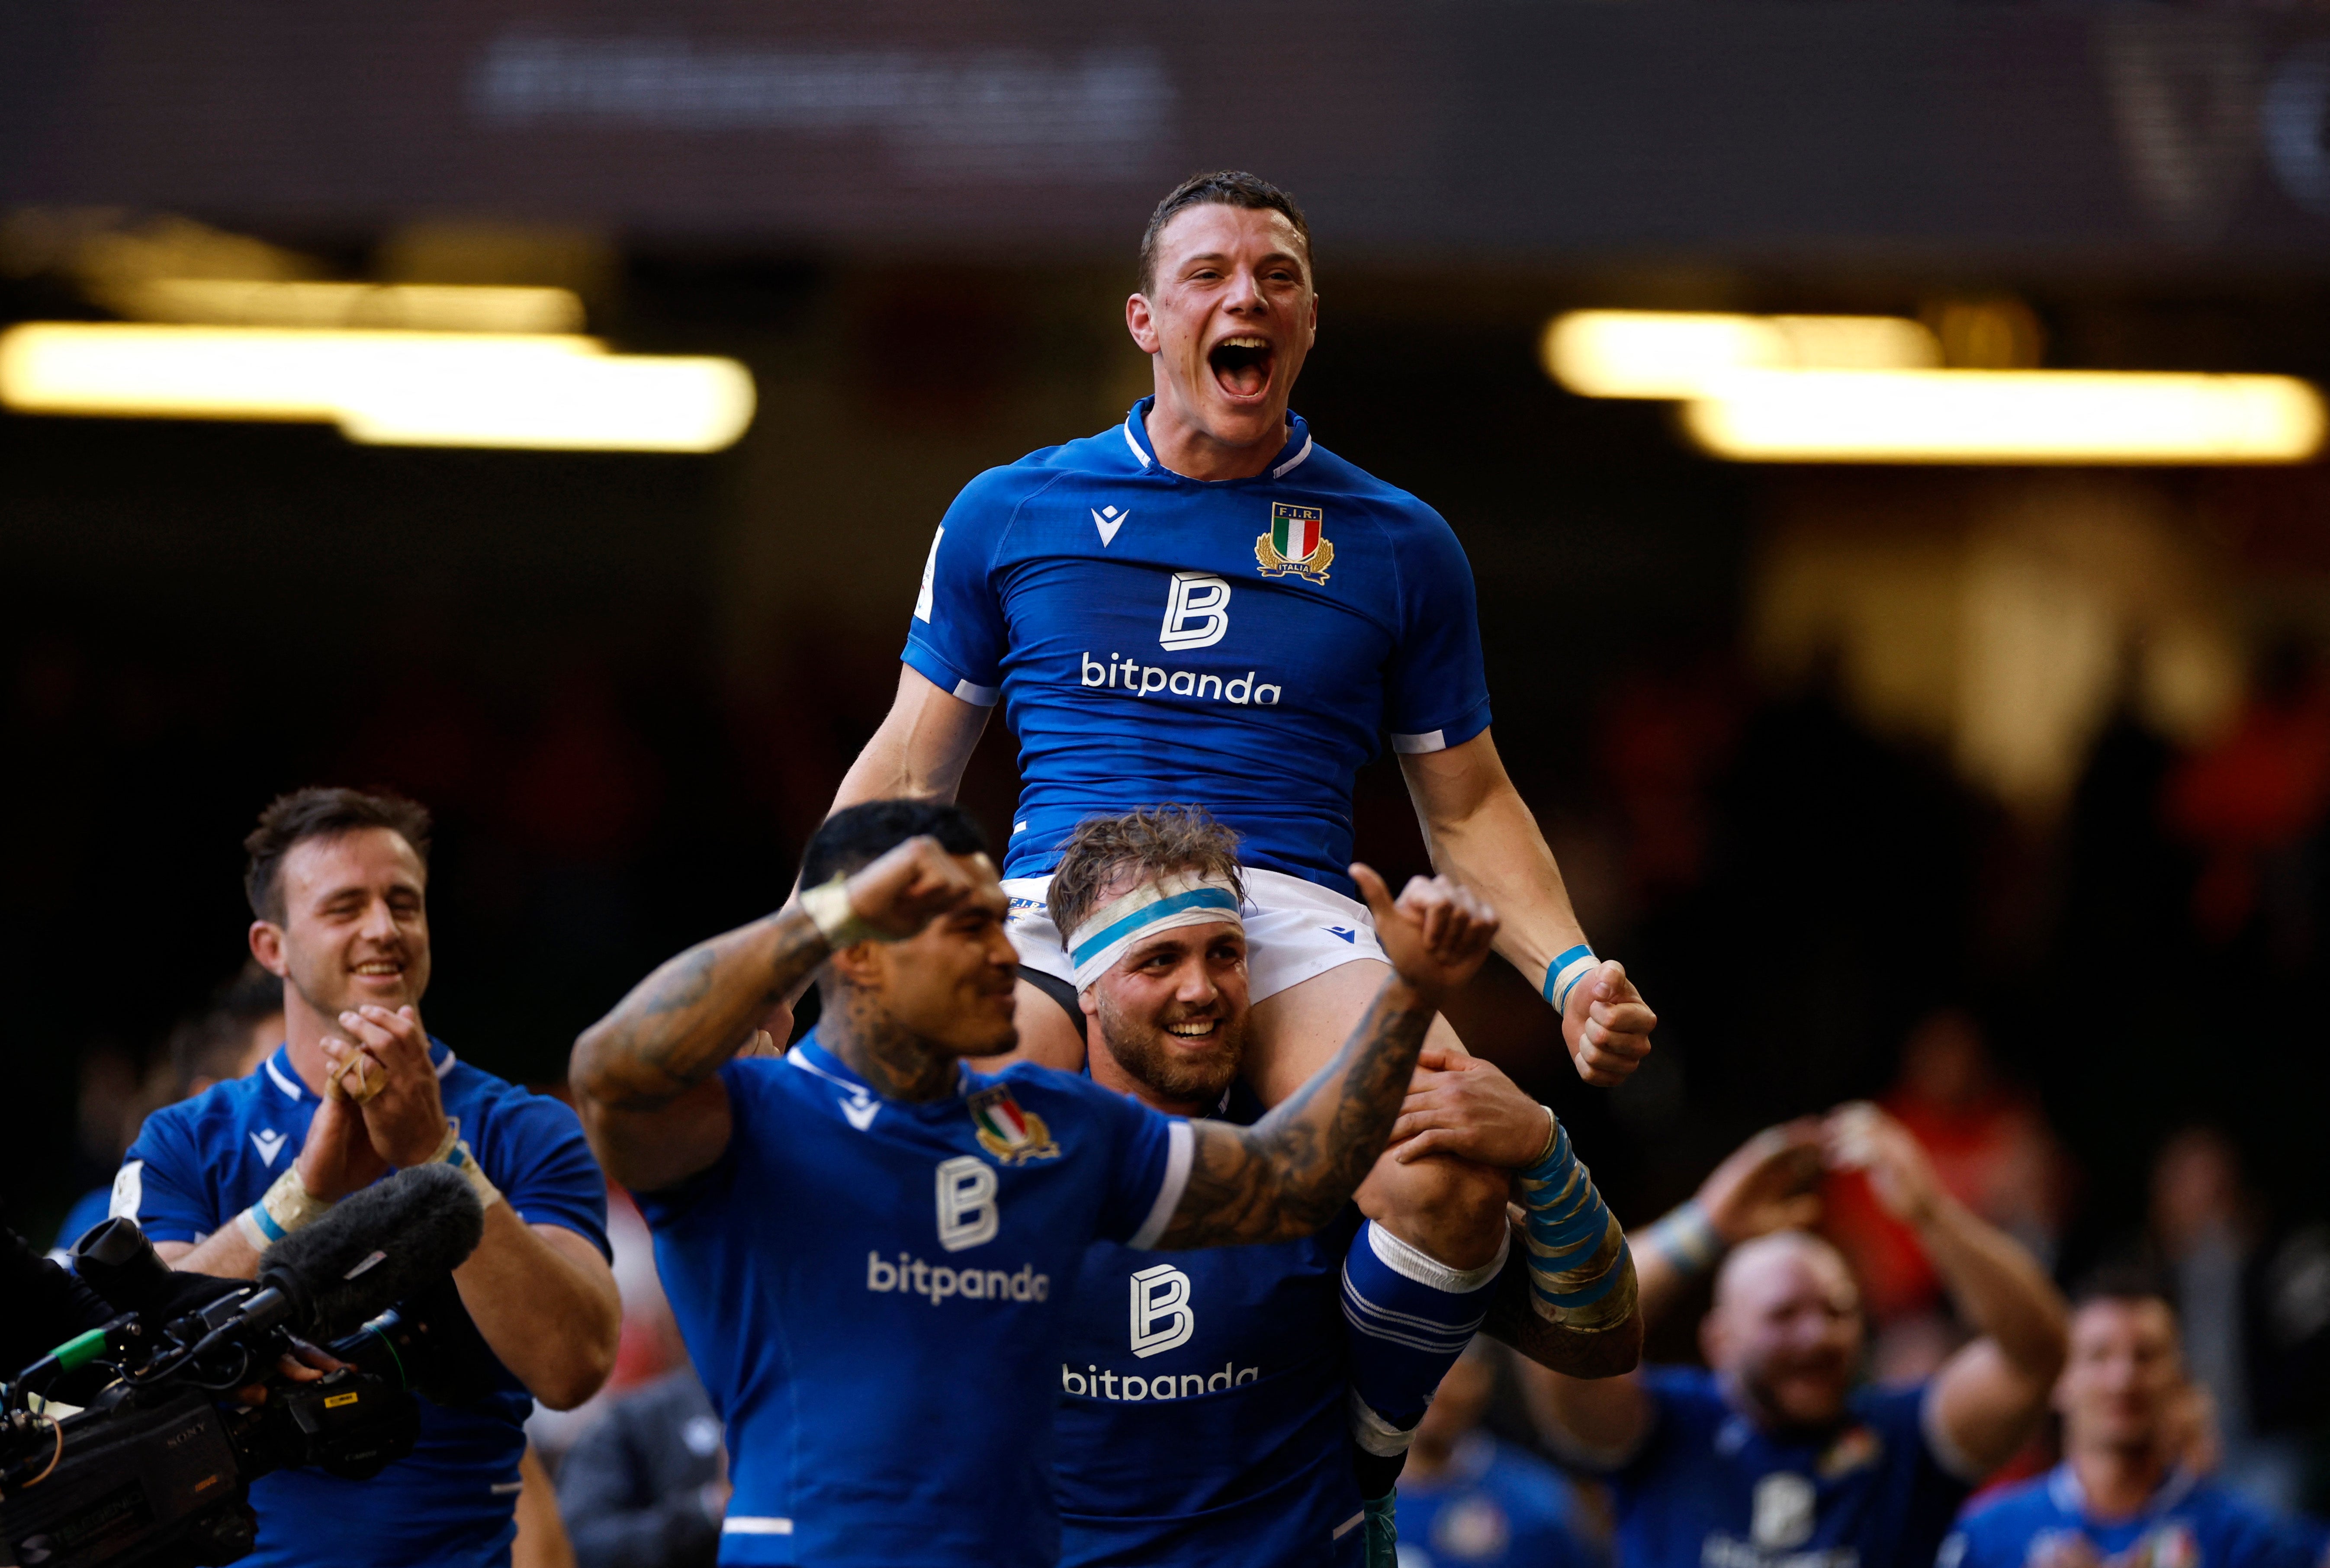 Italy won a first Six Nations game since 2015 in dramatic fashion